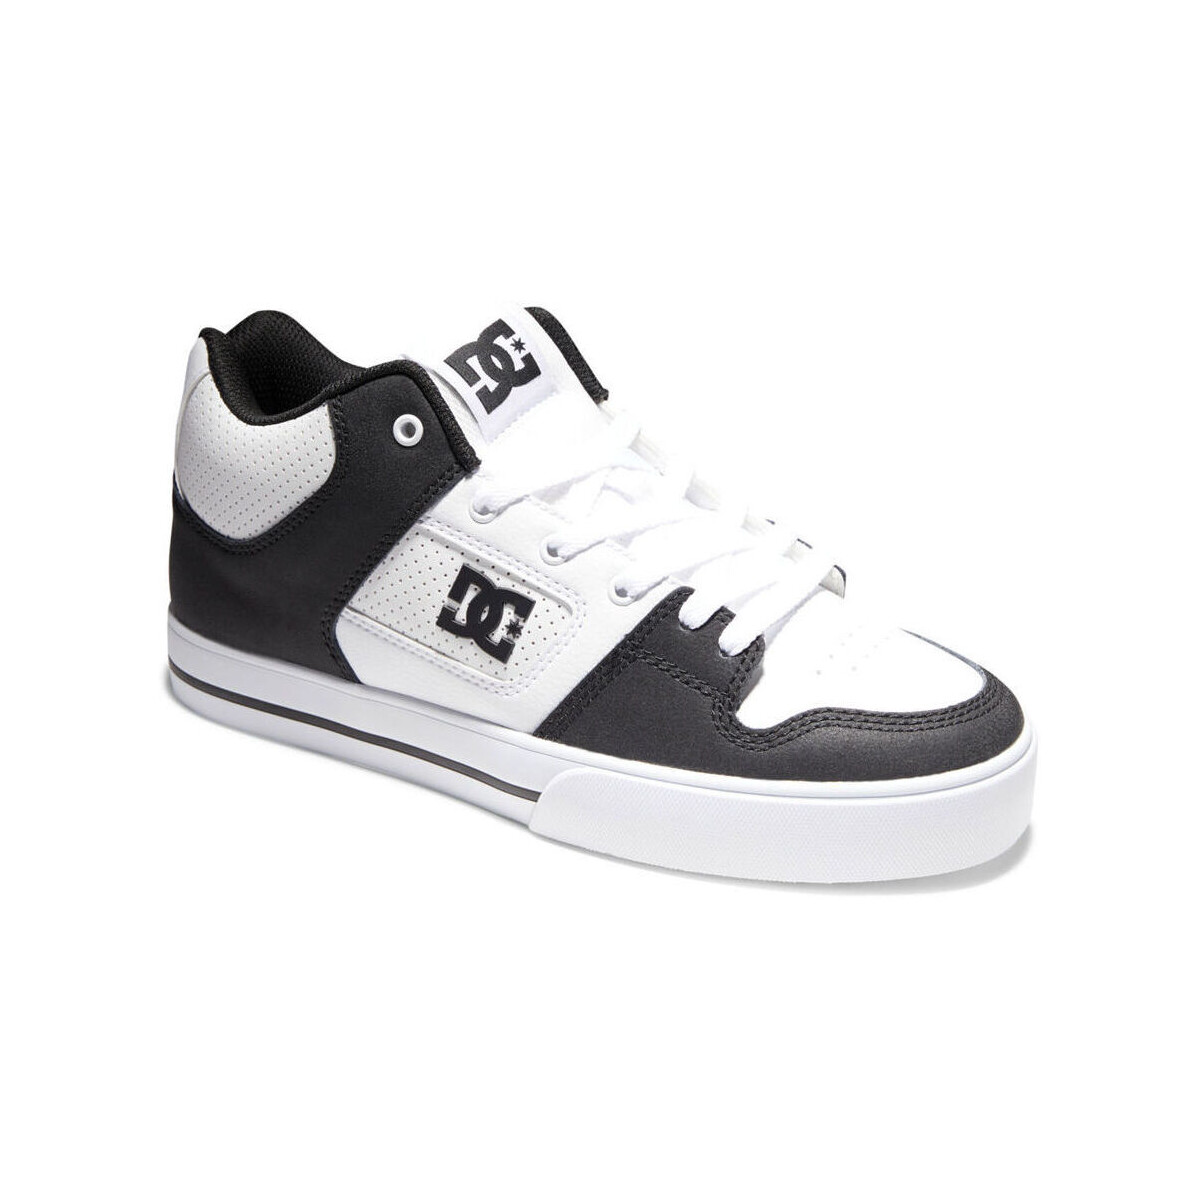 Chaussures Homme Baskets mode DC Shoes Pure mid ADYS400082 WHITE/BLACK/WHITE (WBI) Blanc